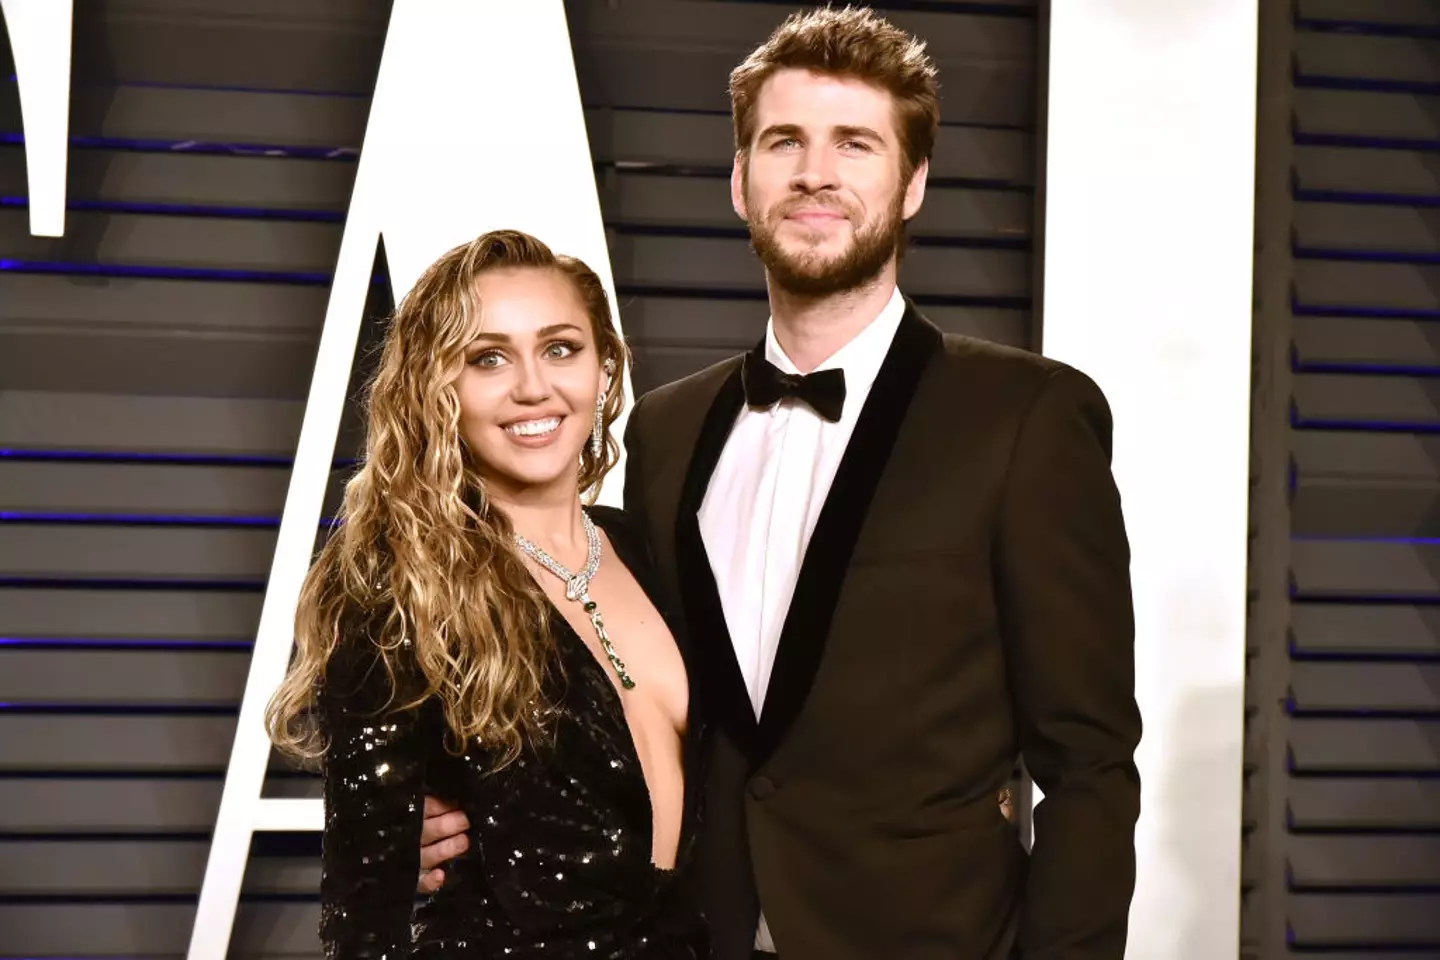 Miley Cyrus and Liam Hemsworth married in 2018 but parted ways less than a year later.